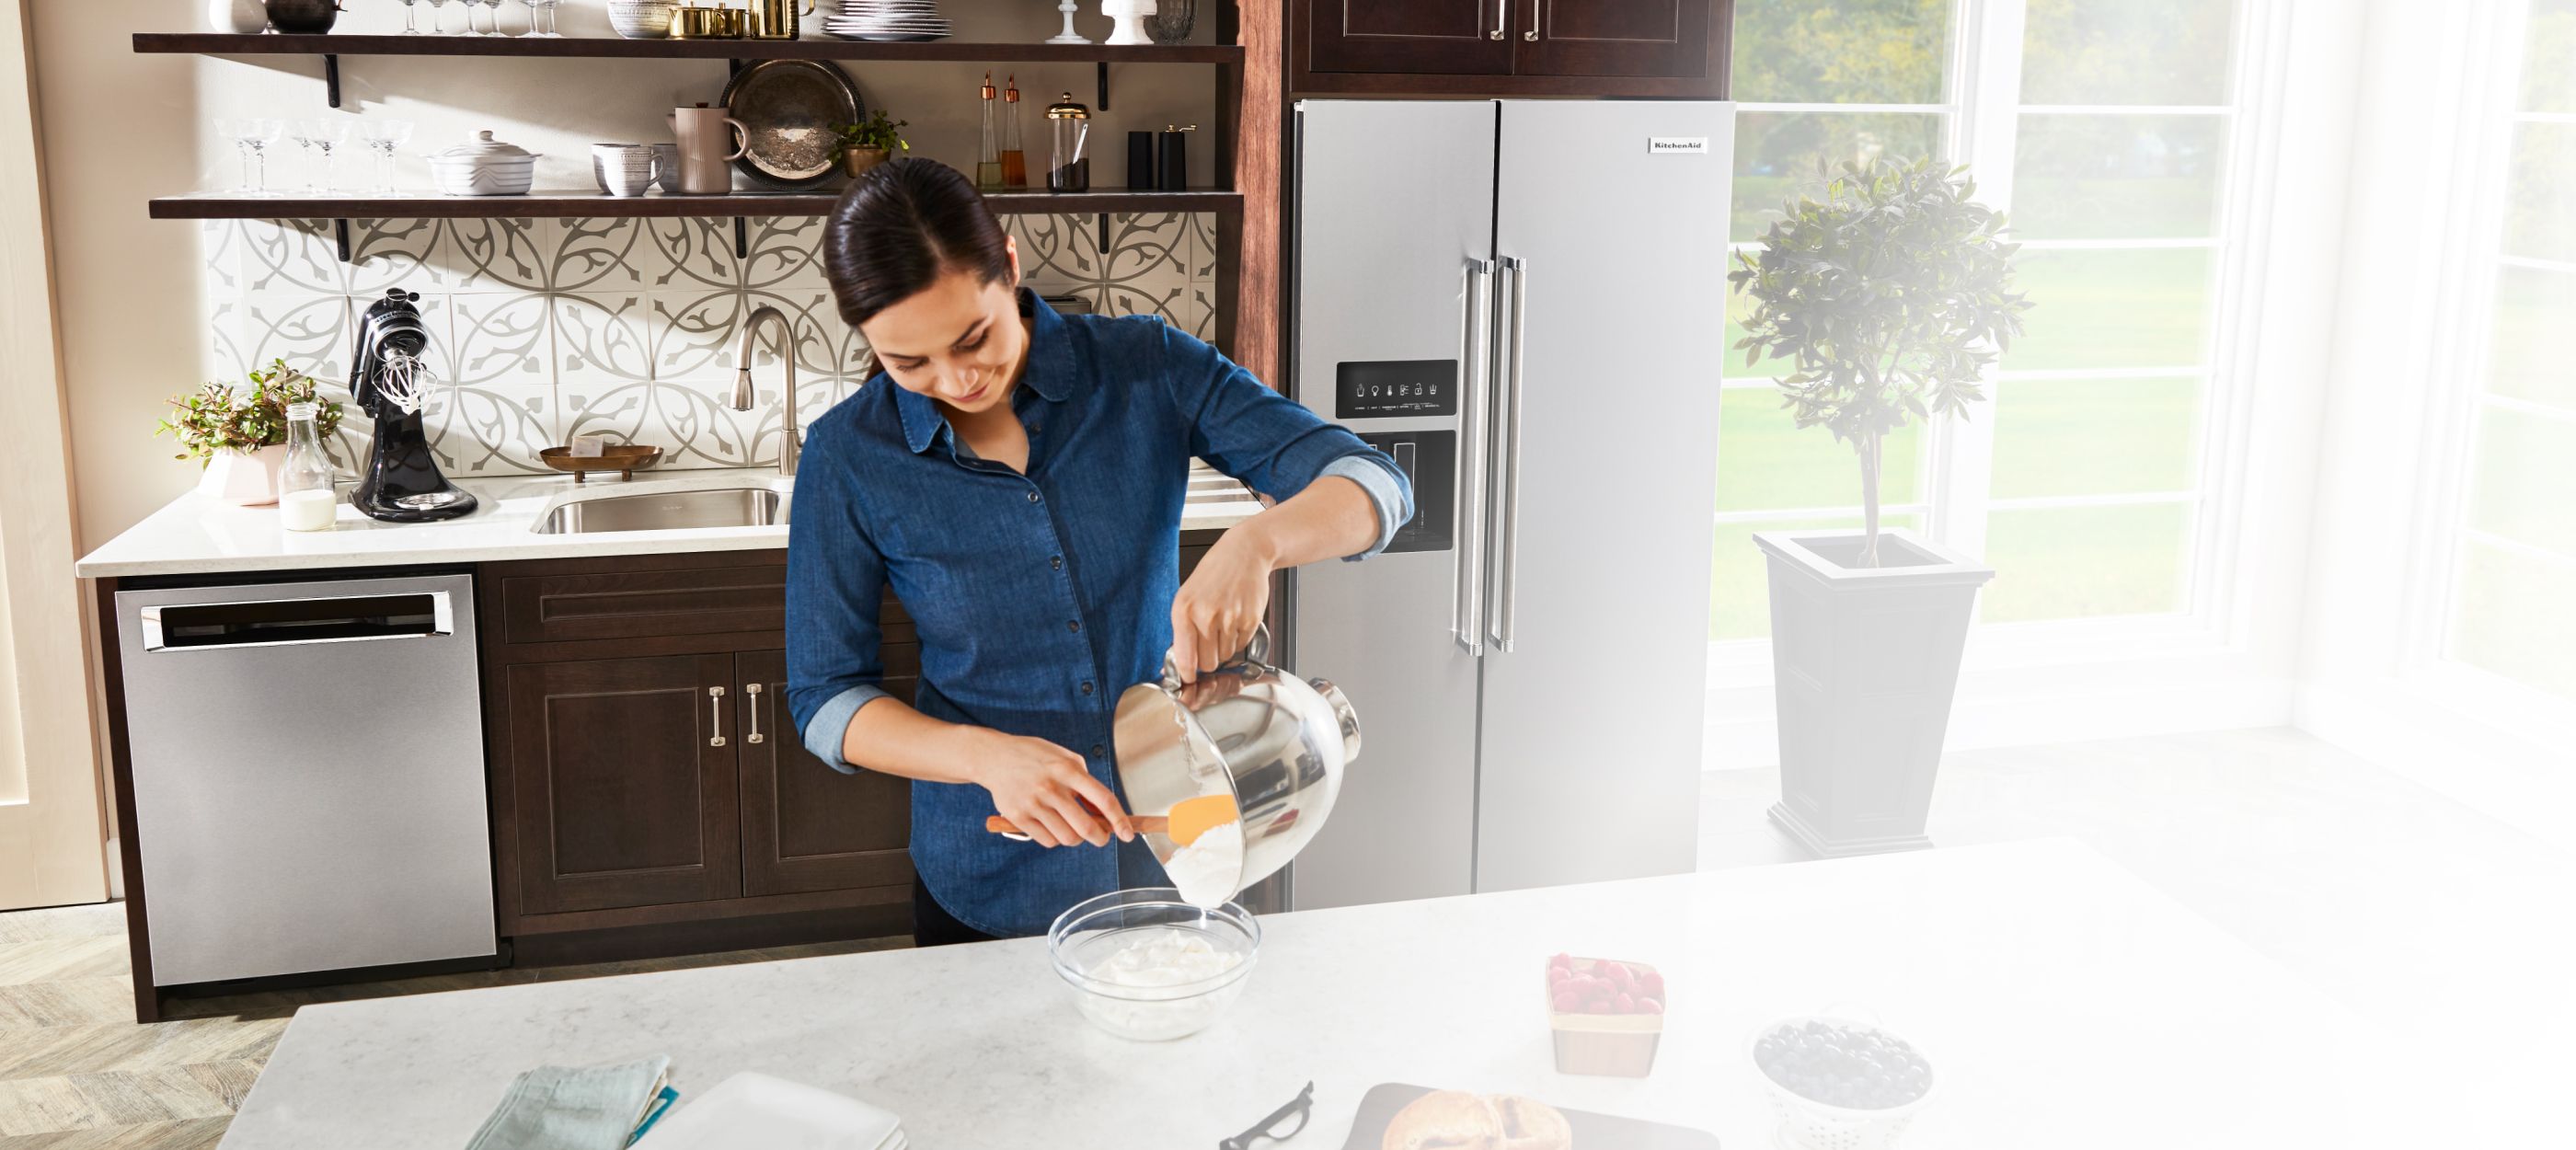 Baking in a KitchenAid® wall oven.